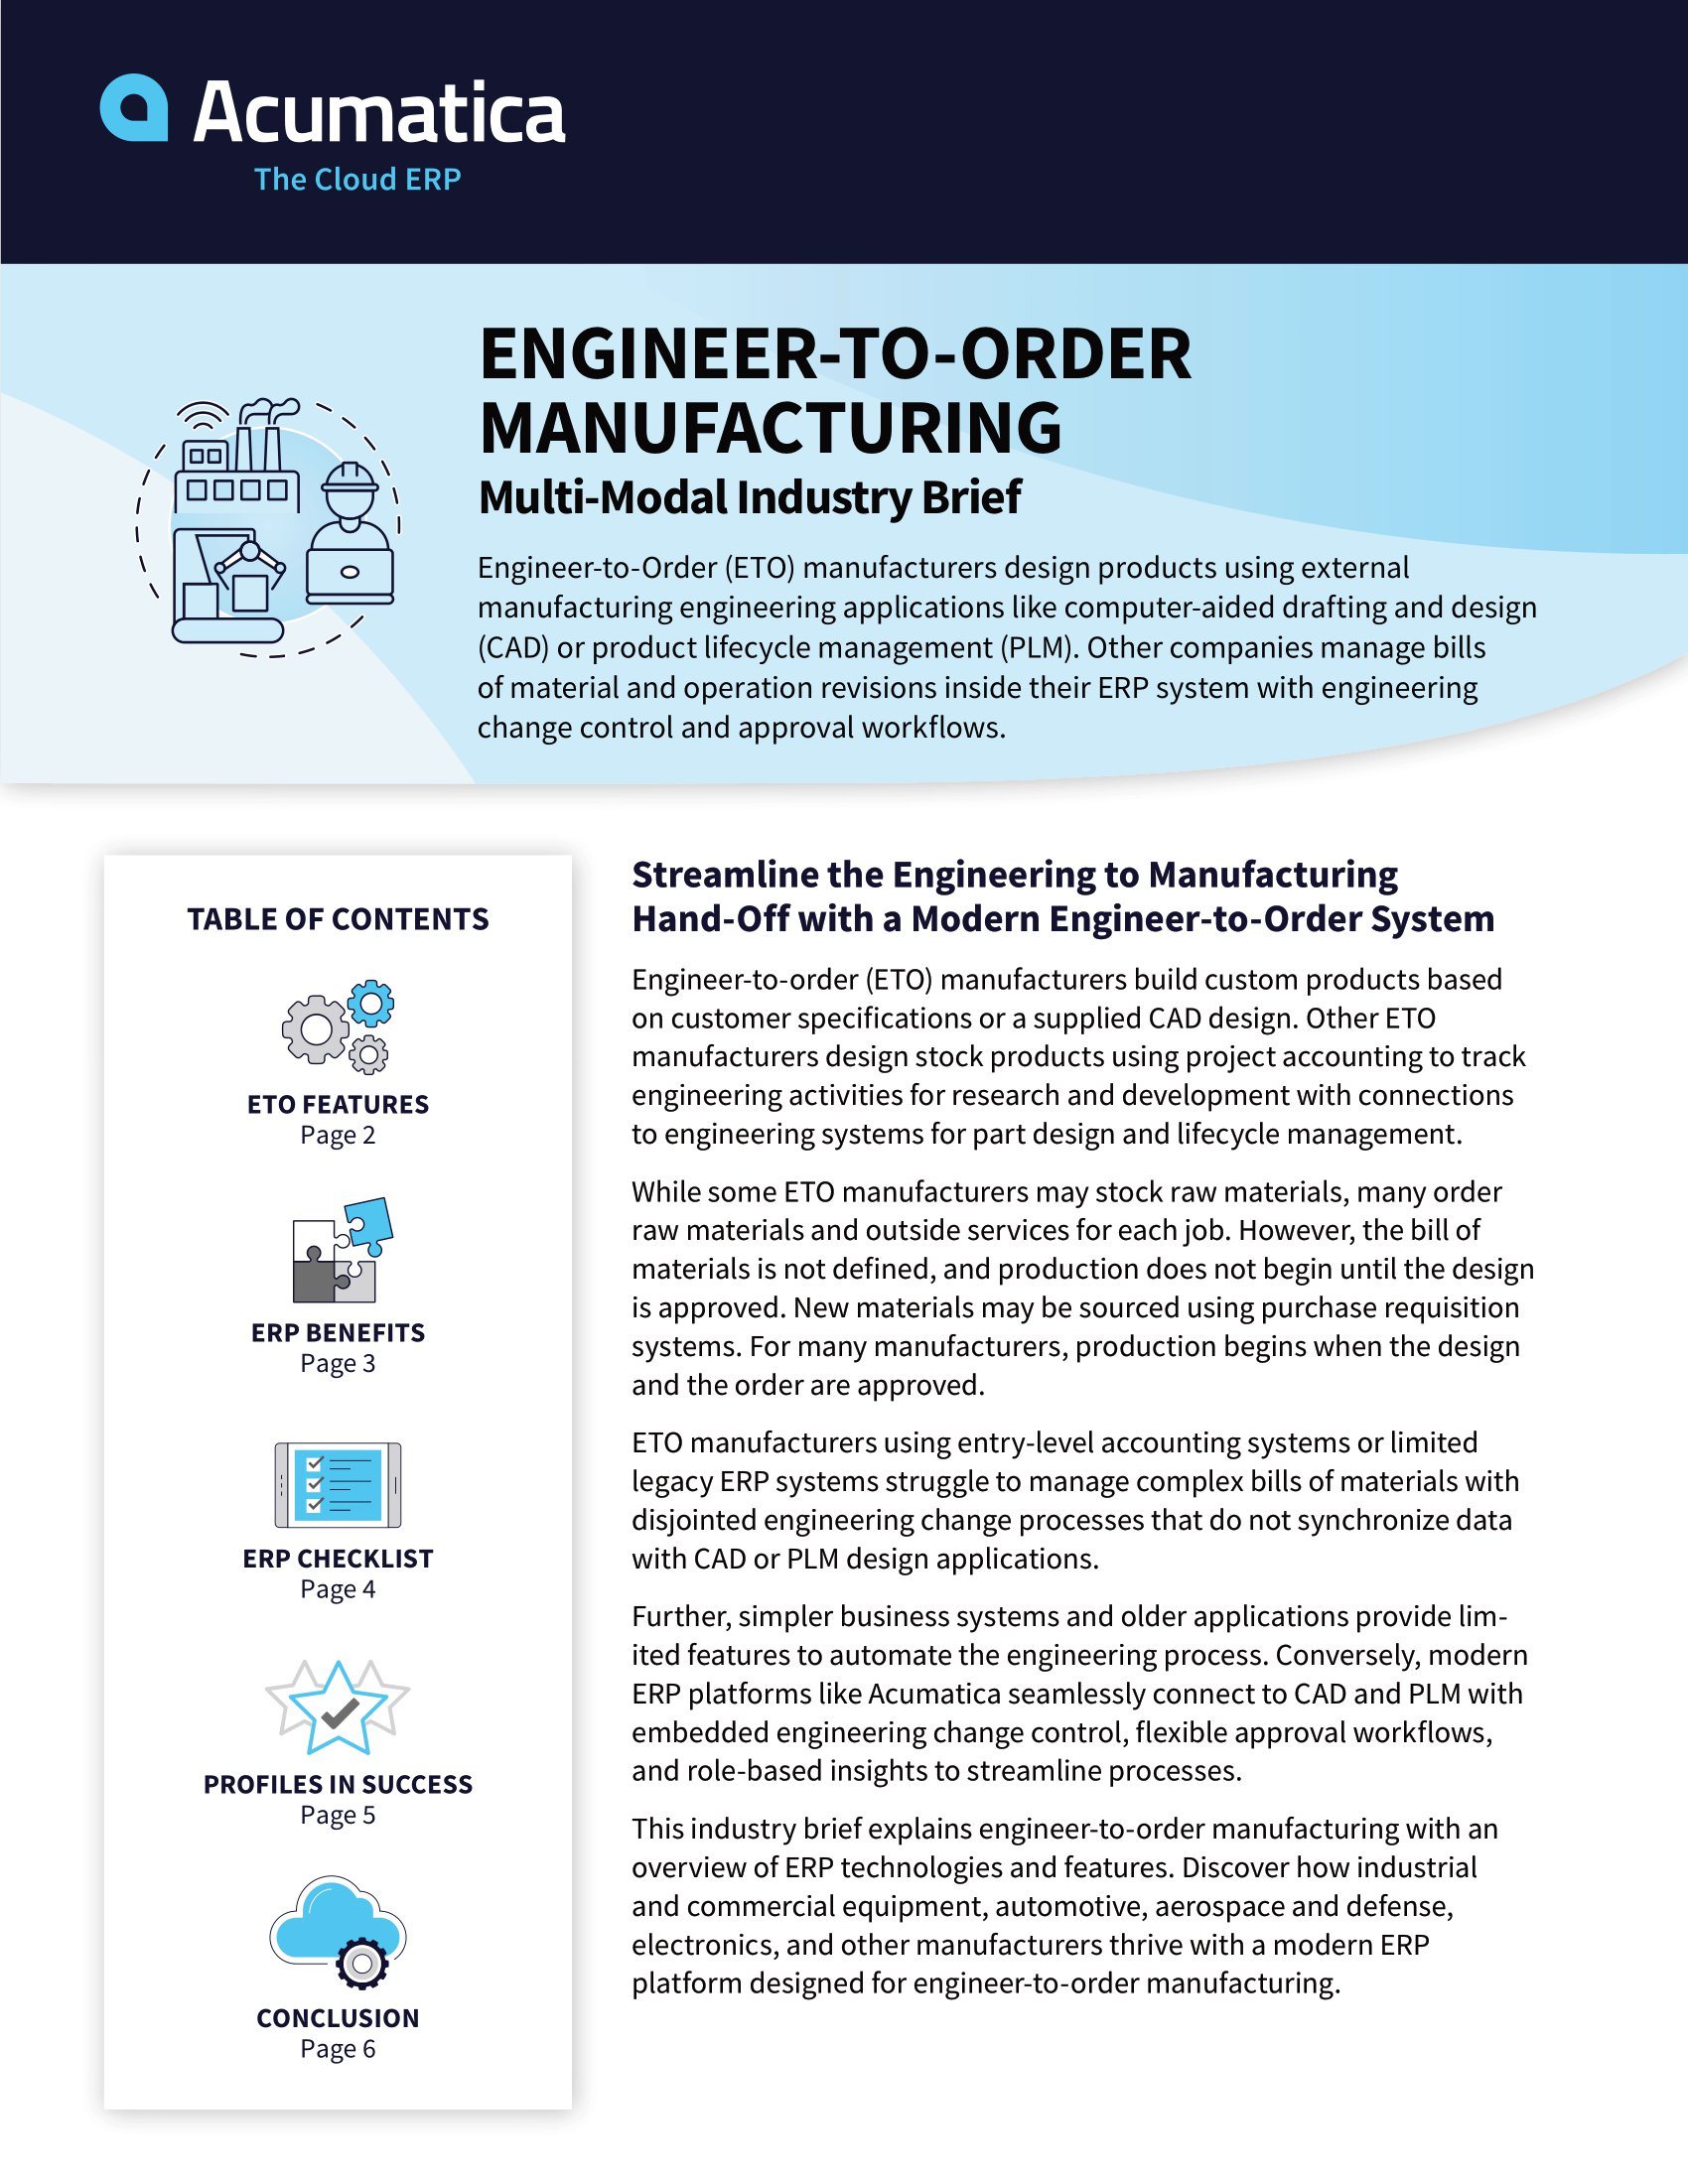 Transform Engineer-to-Order Manufacturing with Acumatica’s Multi-Modal Manufacturing Platform